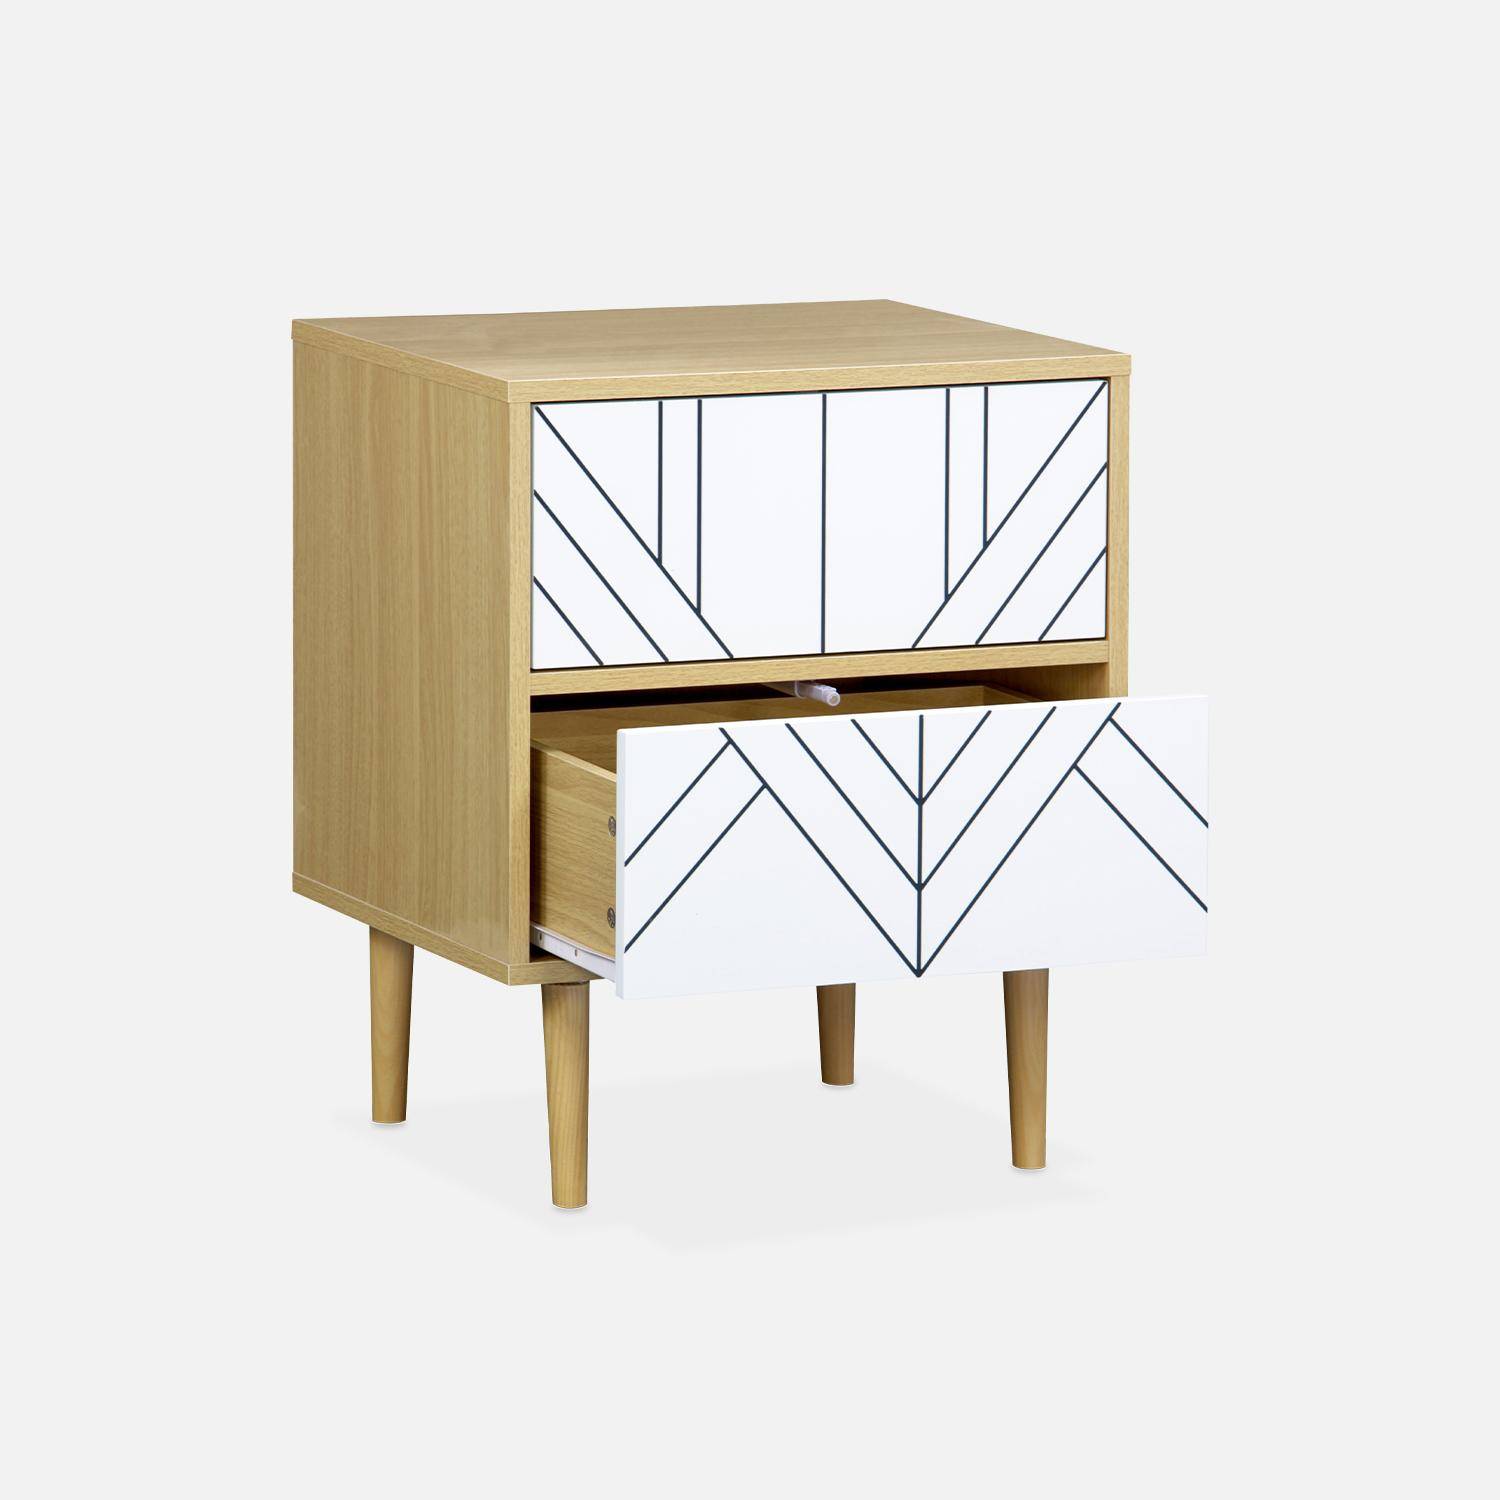 Pair of wood-effect bedside tables with two drawers, 48x40x59cm - Mika - White,sweeek,Photo6